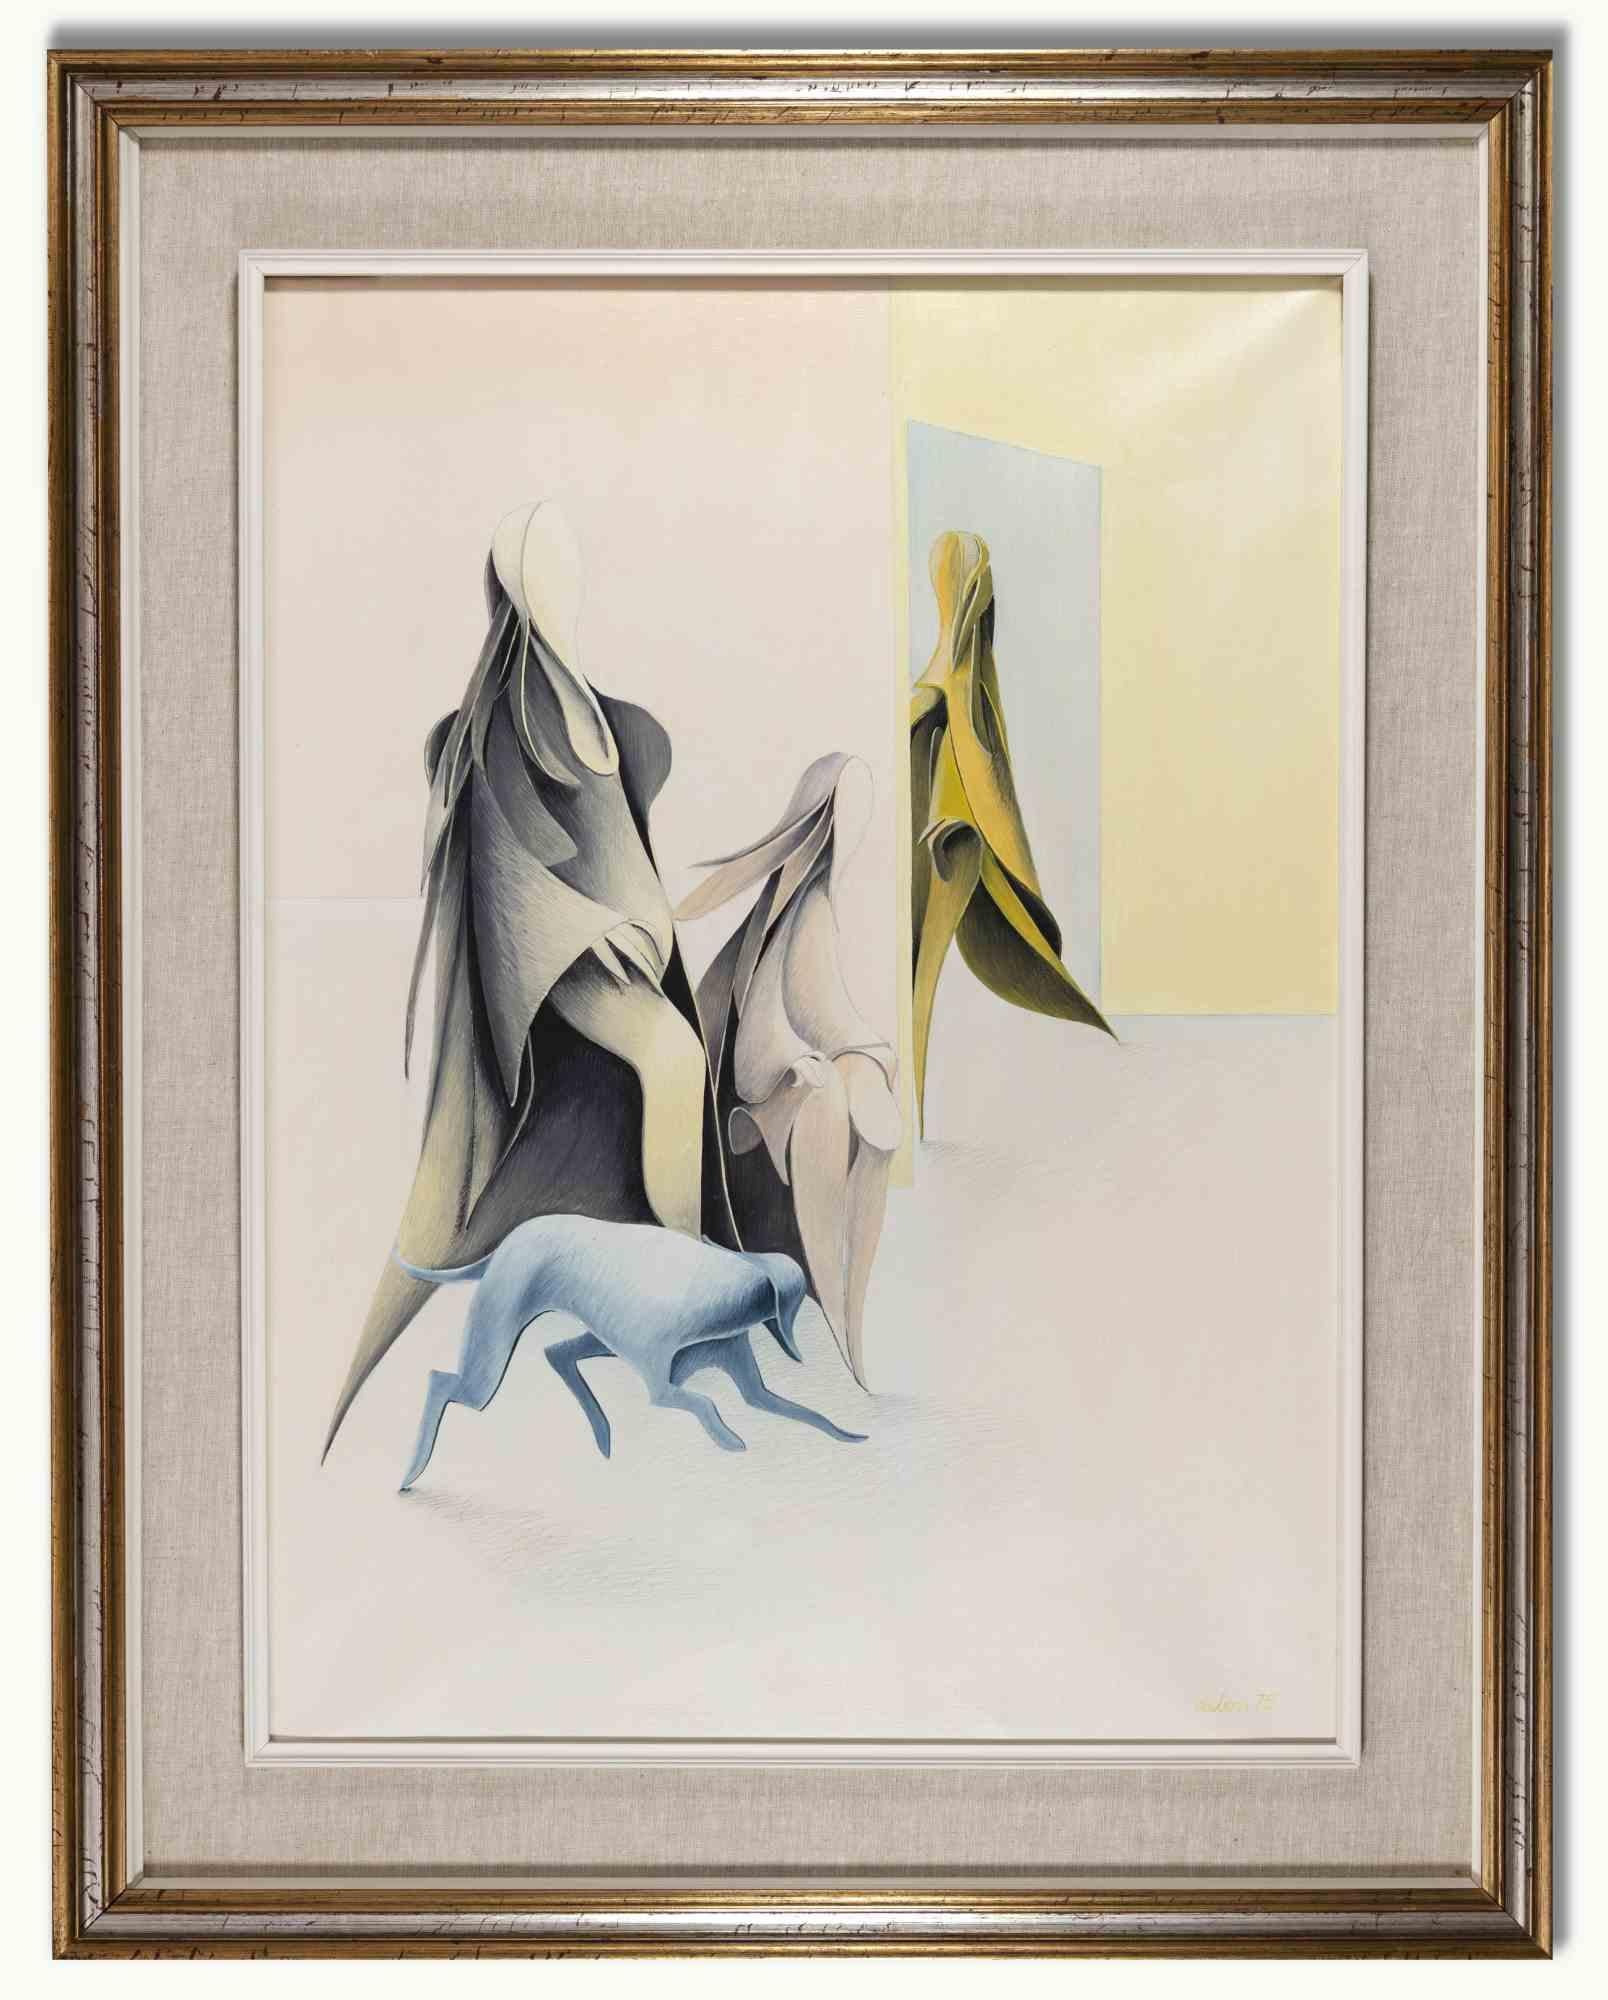 Untitled - Surrealist Scene is a contemporary artwork realized by Albert Debois in 1975.

Mixed colored oil on canvas.

Hand signed and dated on the lower right margin.

Includes frame: 95.5 x 5 x 75.5 cm

Dry stamp of the provenance: Gallerita di